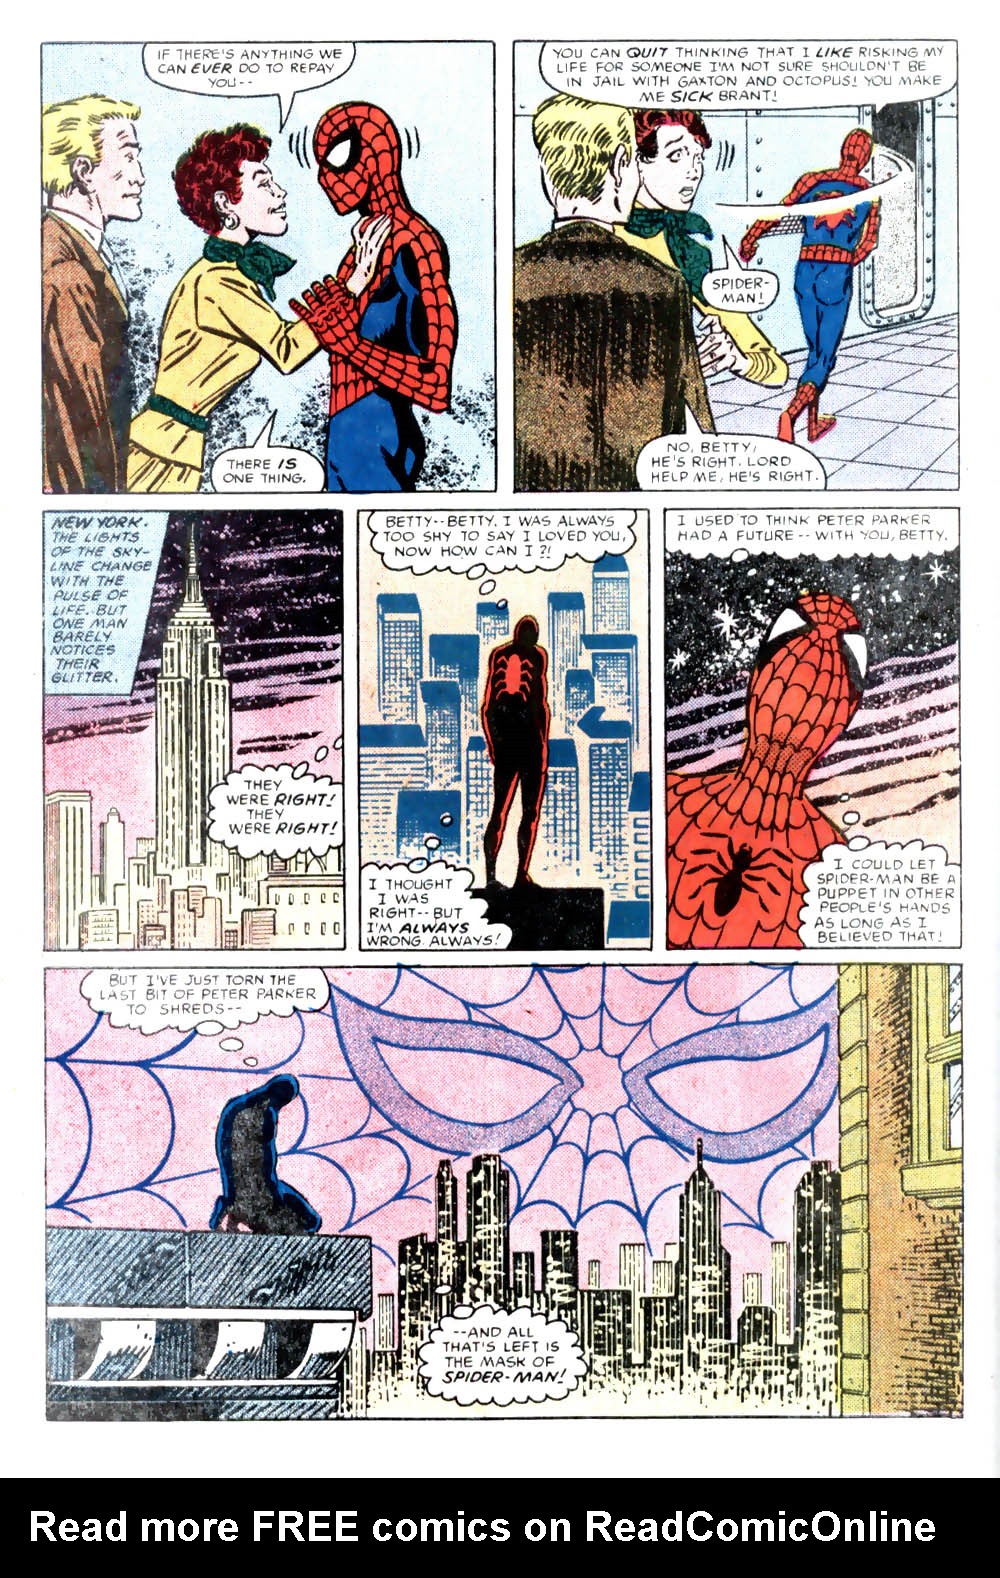 What If? (1977) issue 46 - Spiderman's uncle ben had lived - Page 29